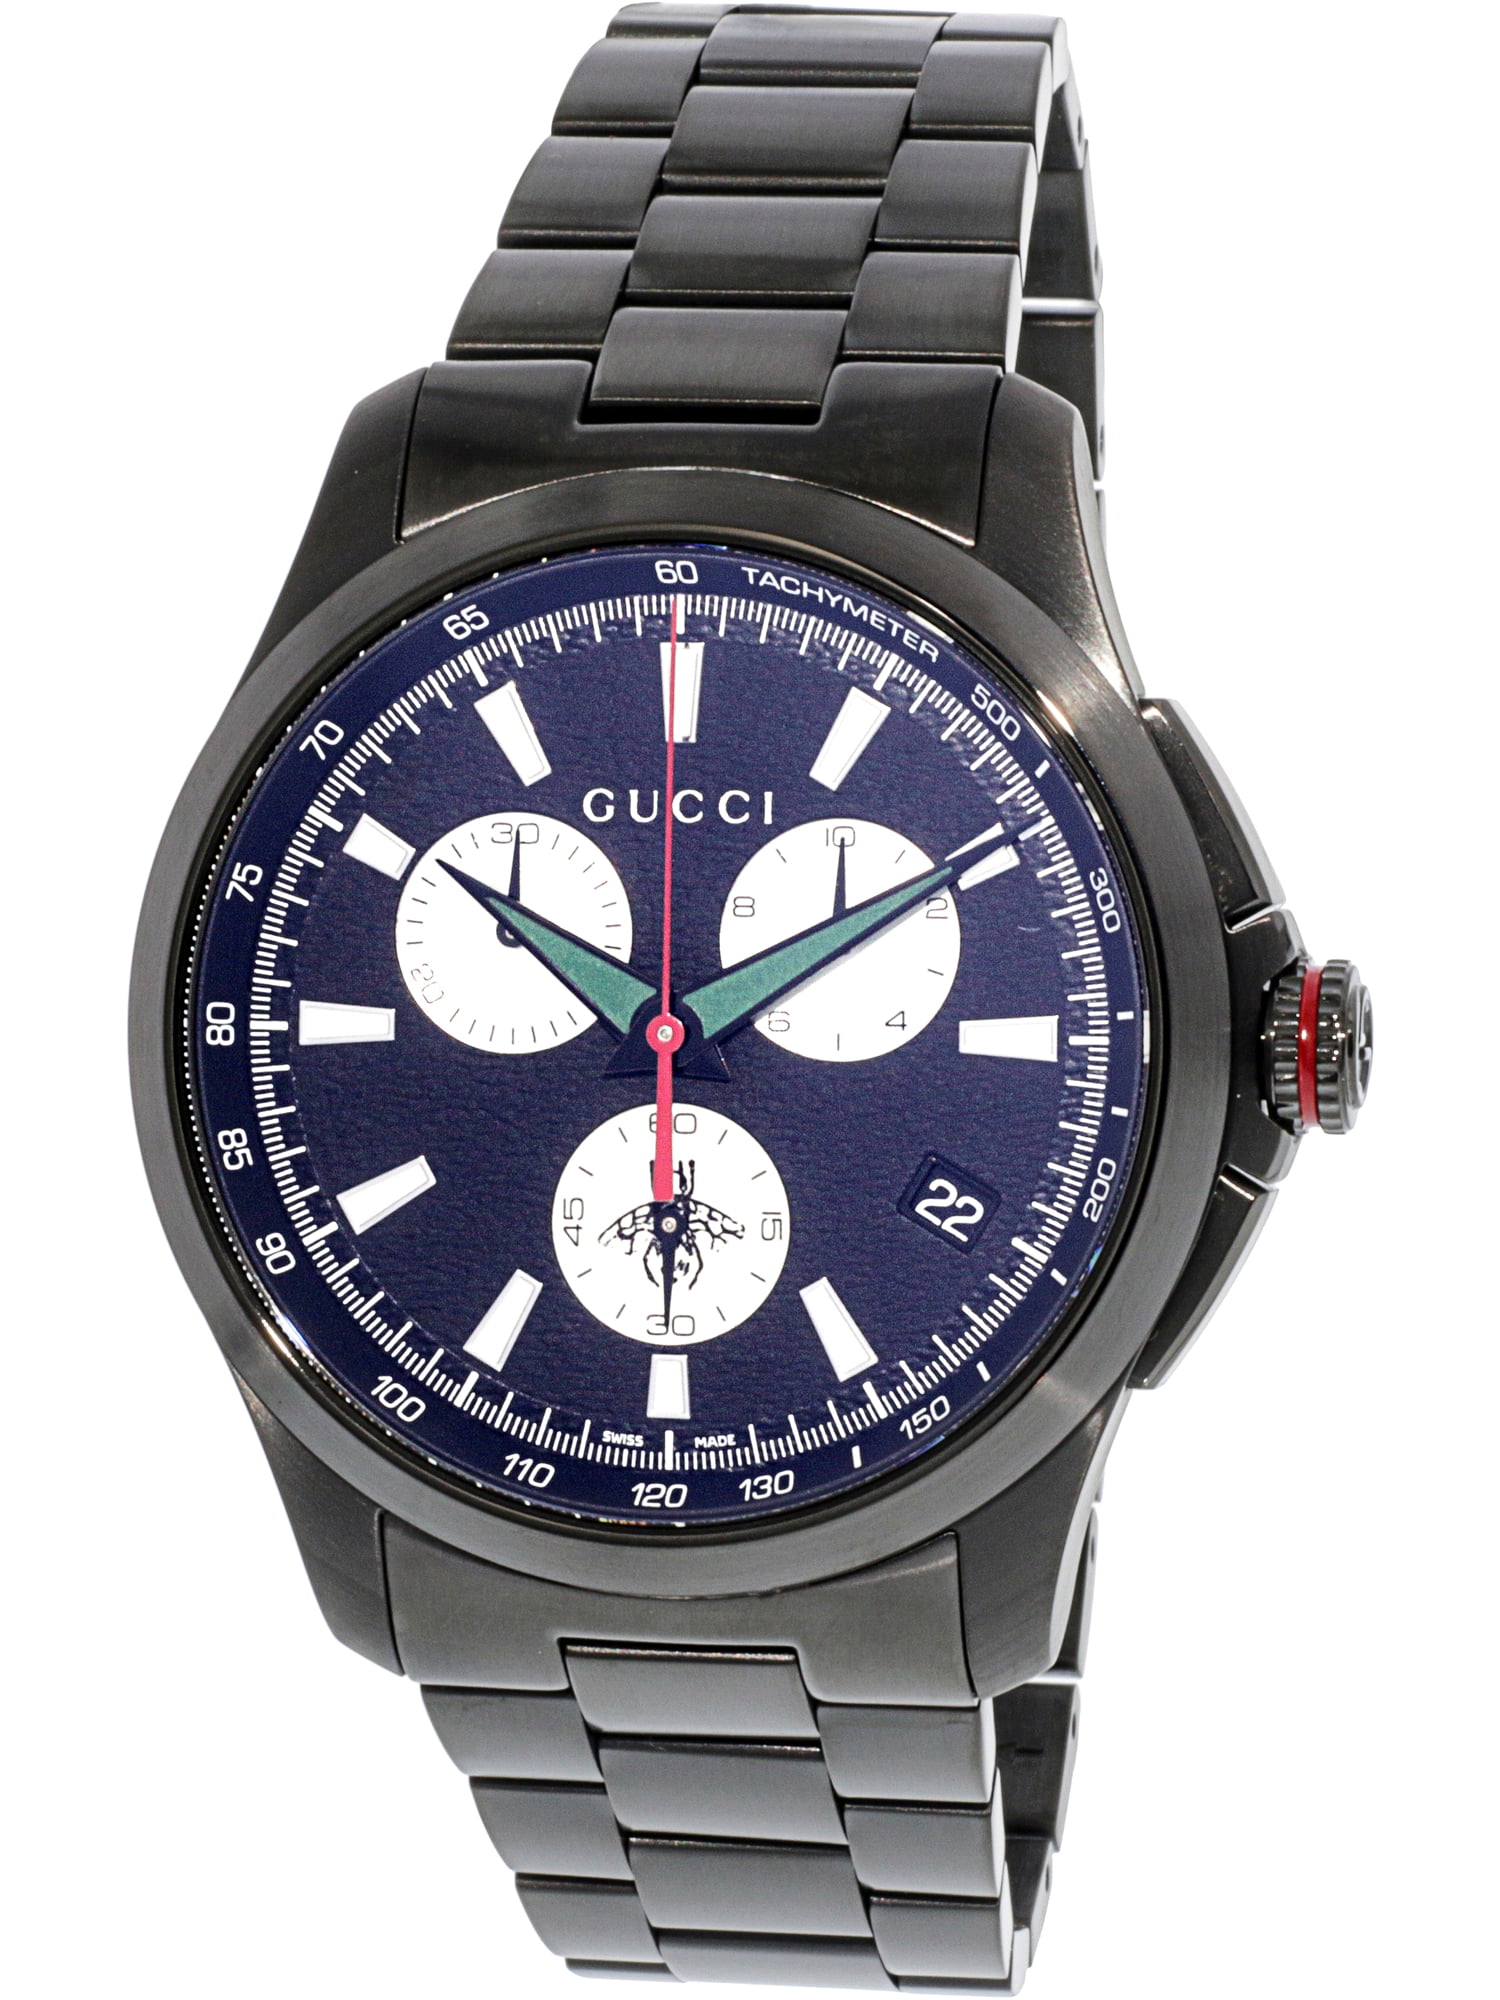 Gucci G-Timeless Black Stainless Steel Chronograph Mens Watch